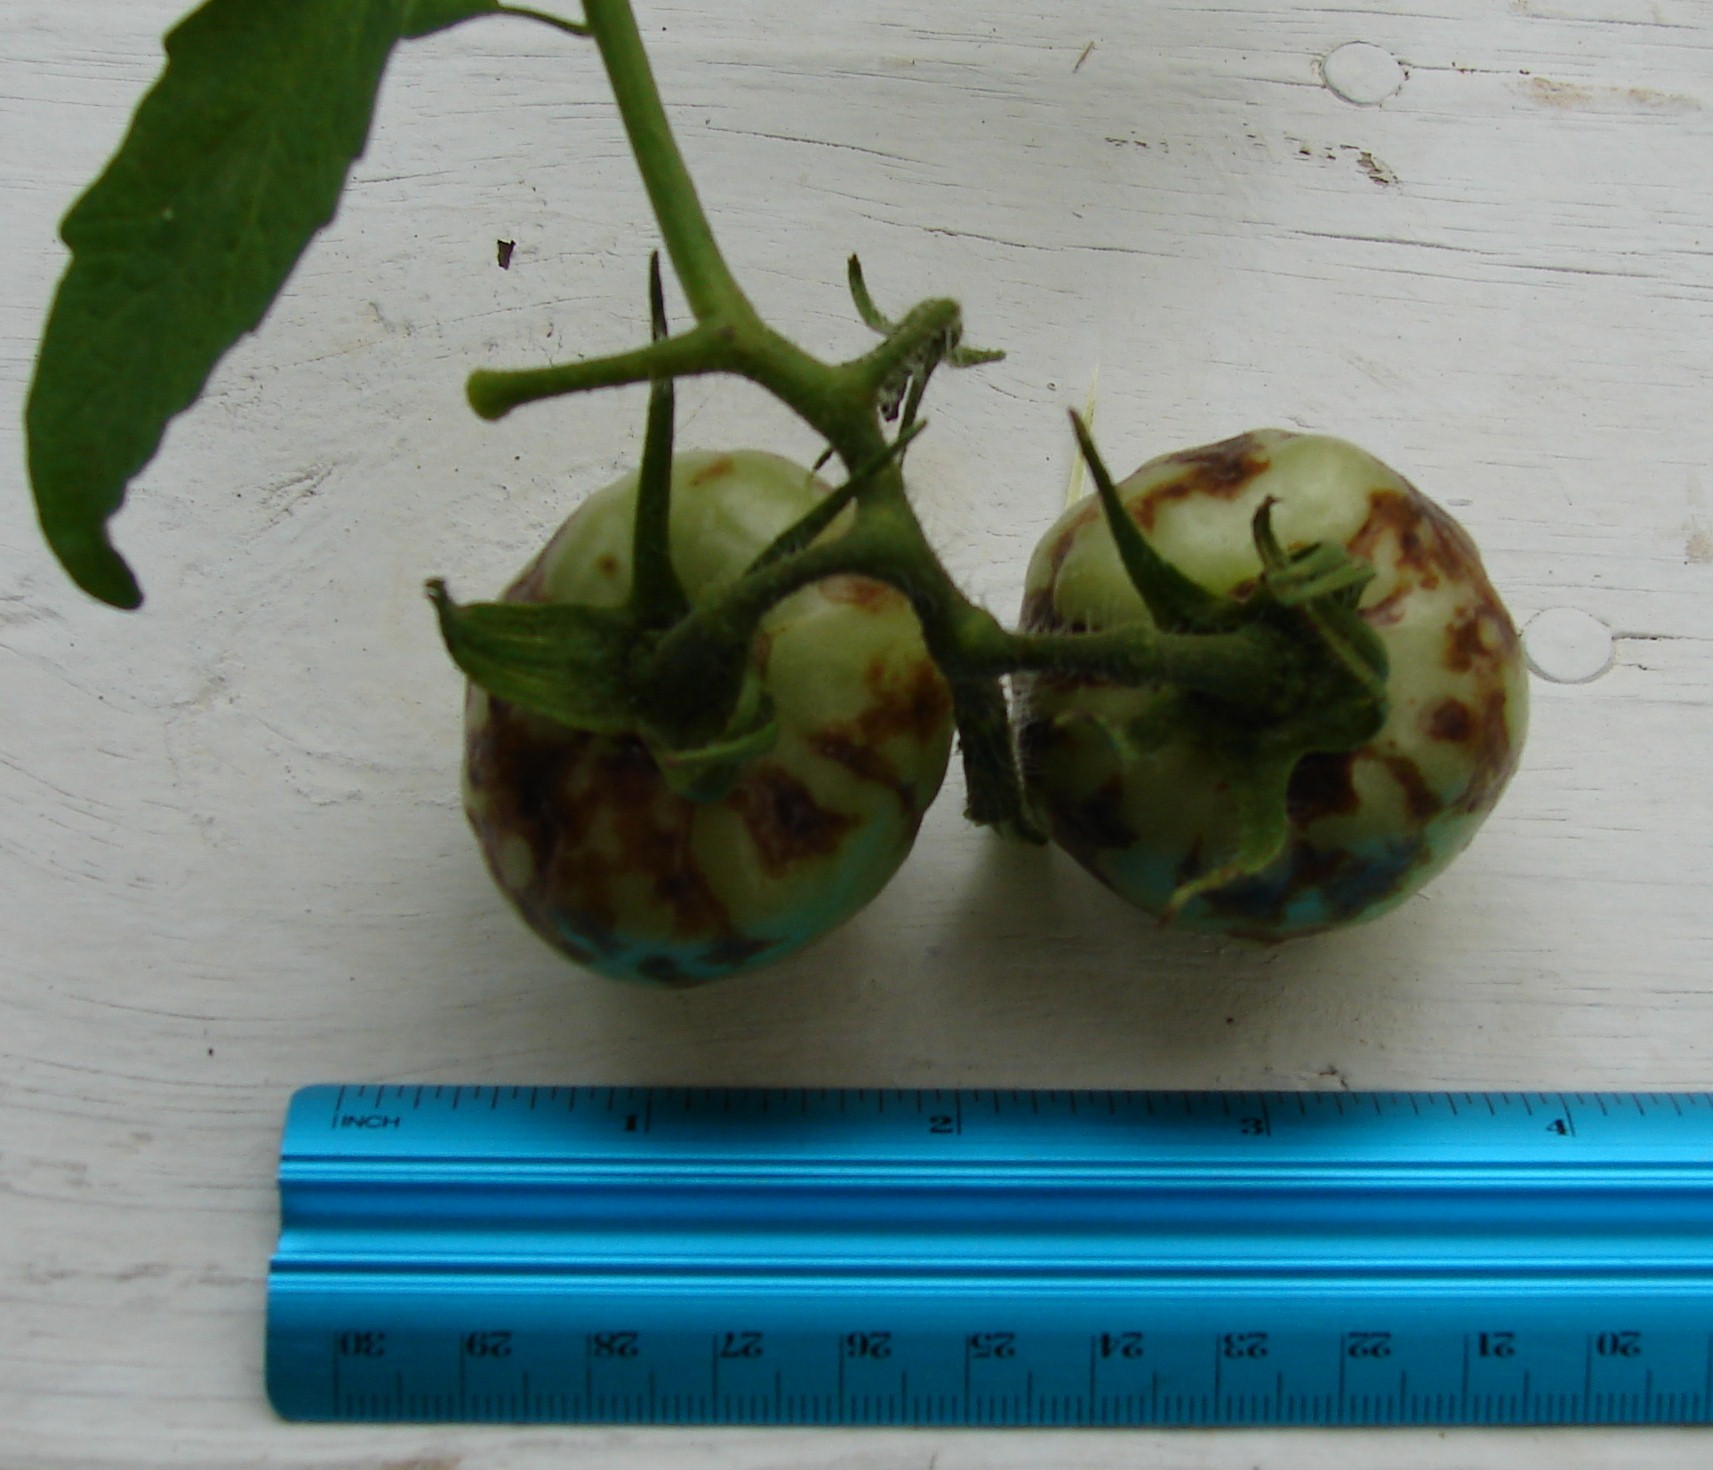 tomato spotted wilt virus 3 don't know source